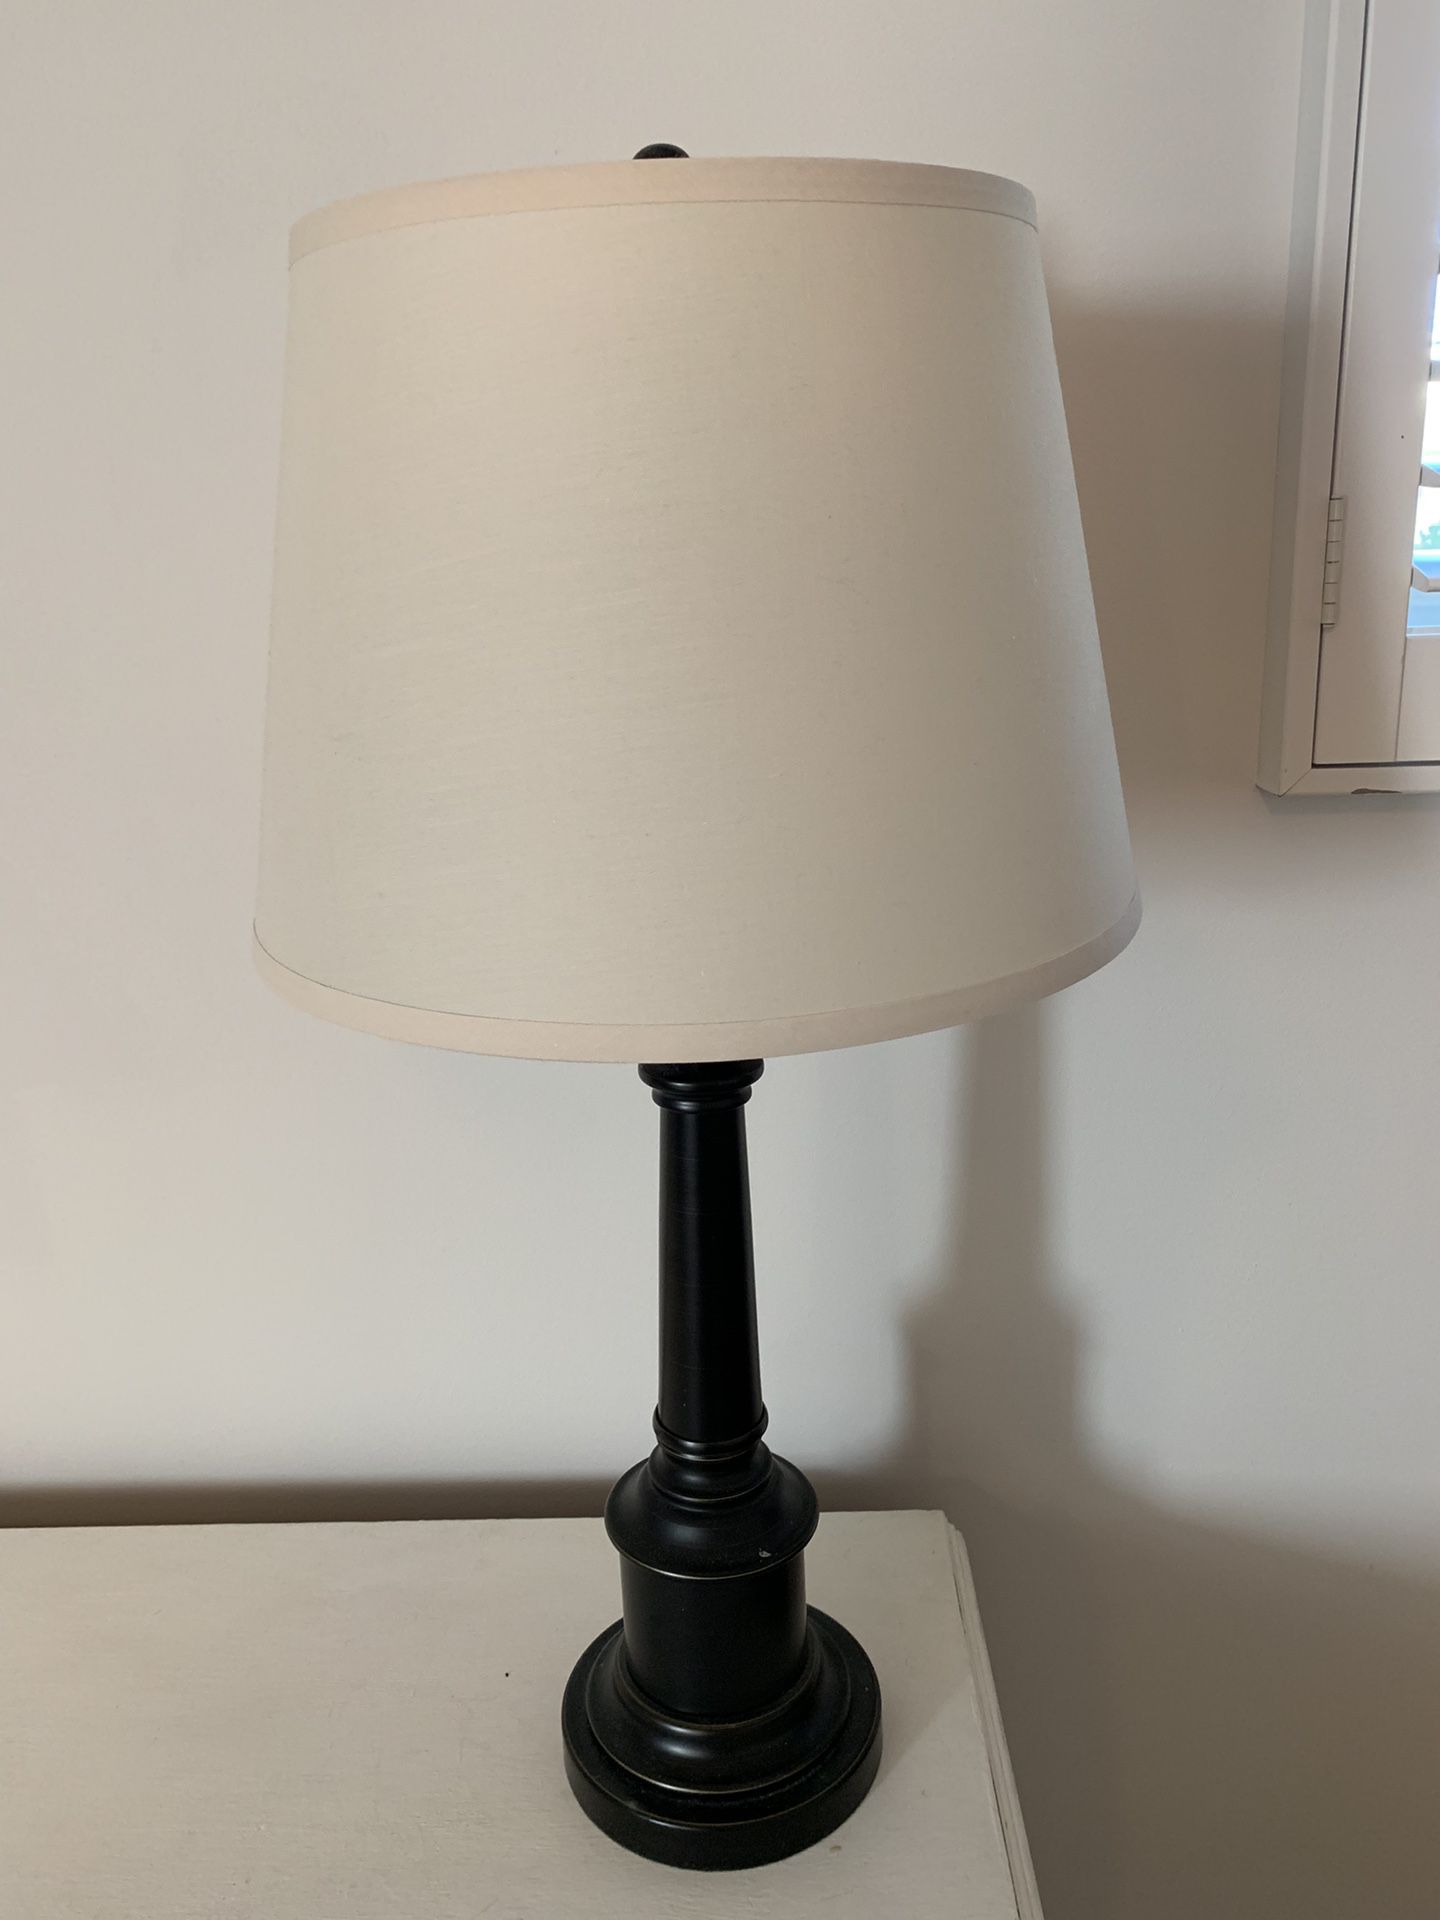 Two matching lamps with cream shades